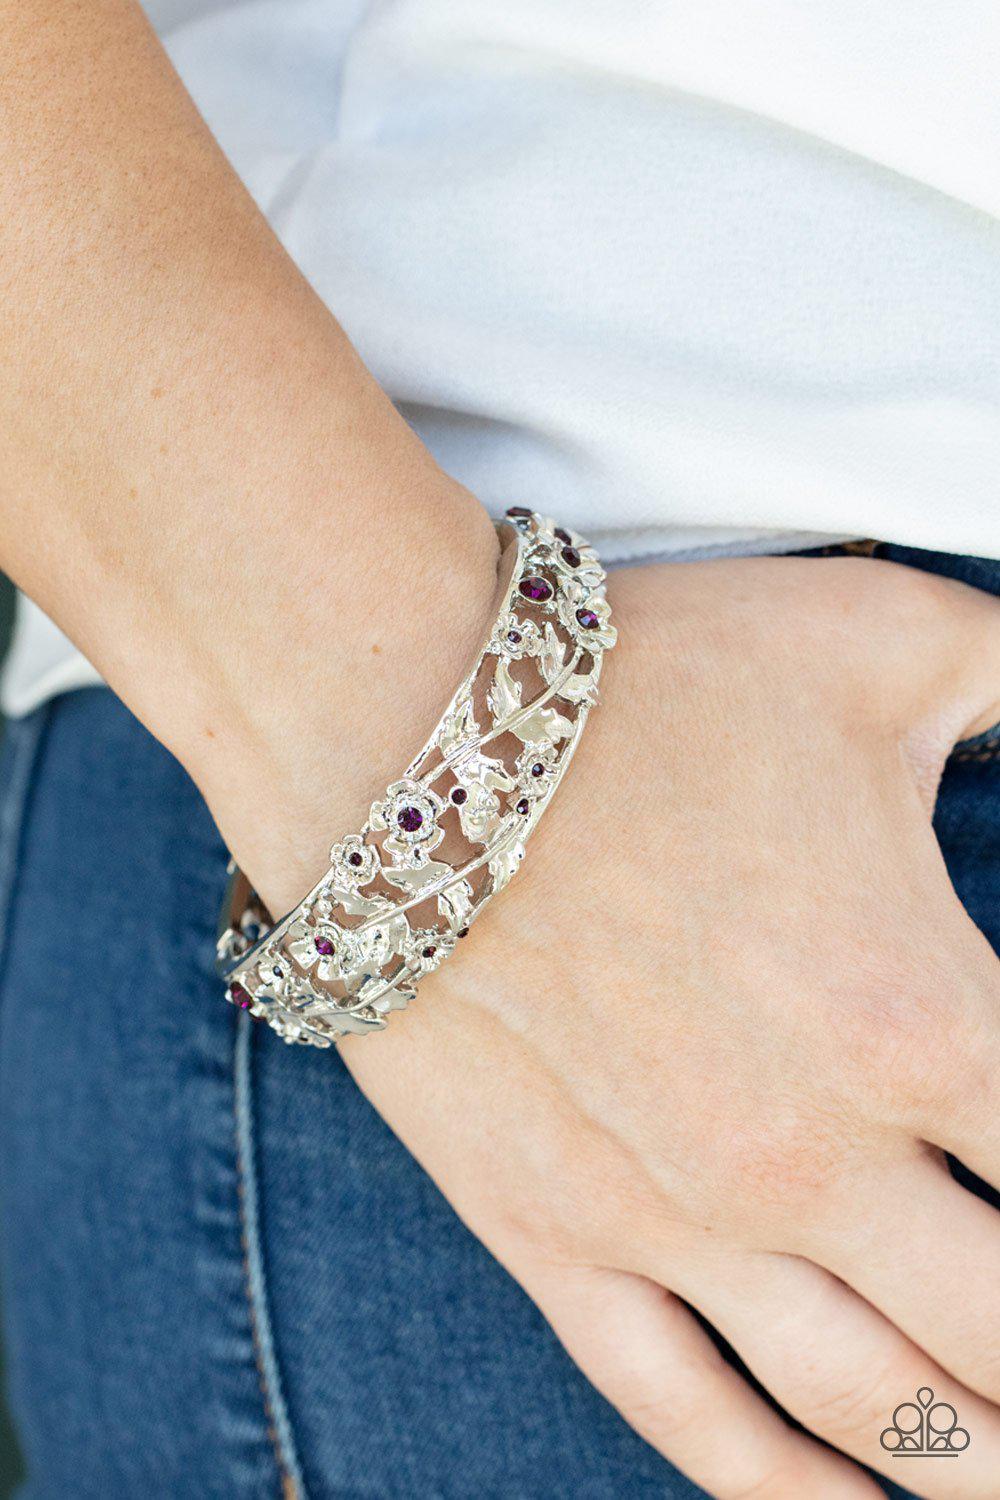 Ripe for the Picking Purple Rhinestone and Silver Filigree Hinged Bangle Bracelet - Paparazzi Accessories 2021 Convention Exclusive- lightbox - CarasShop.com - $5 Jewelry by Cara Jewels